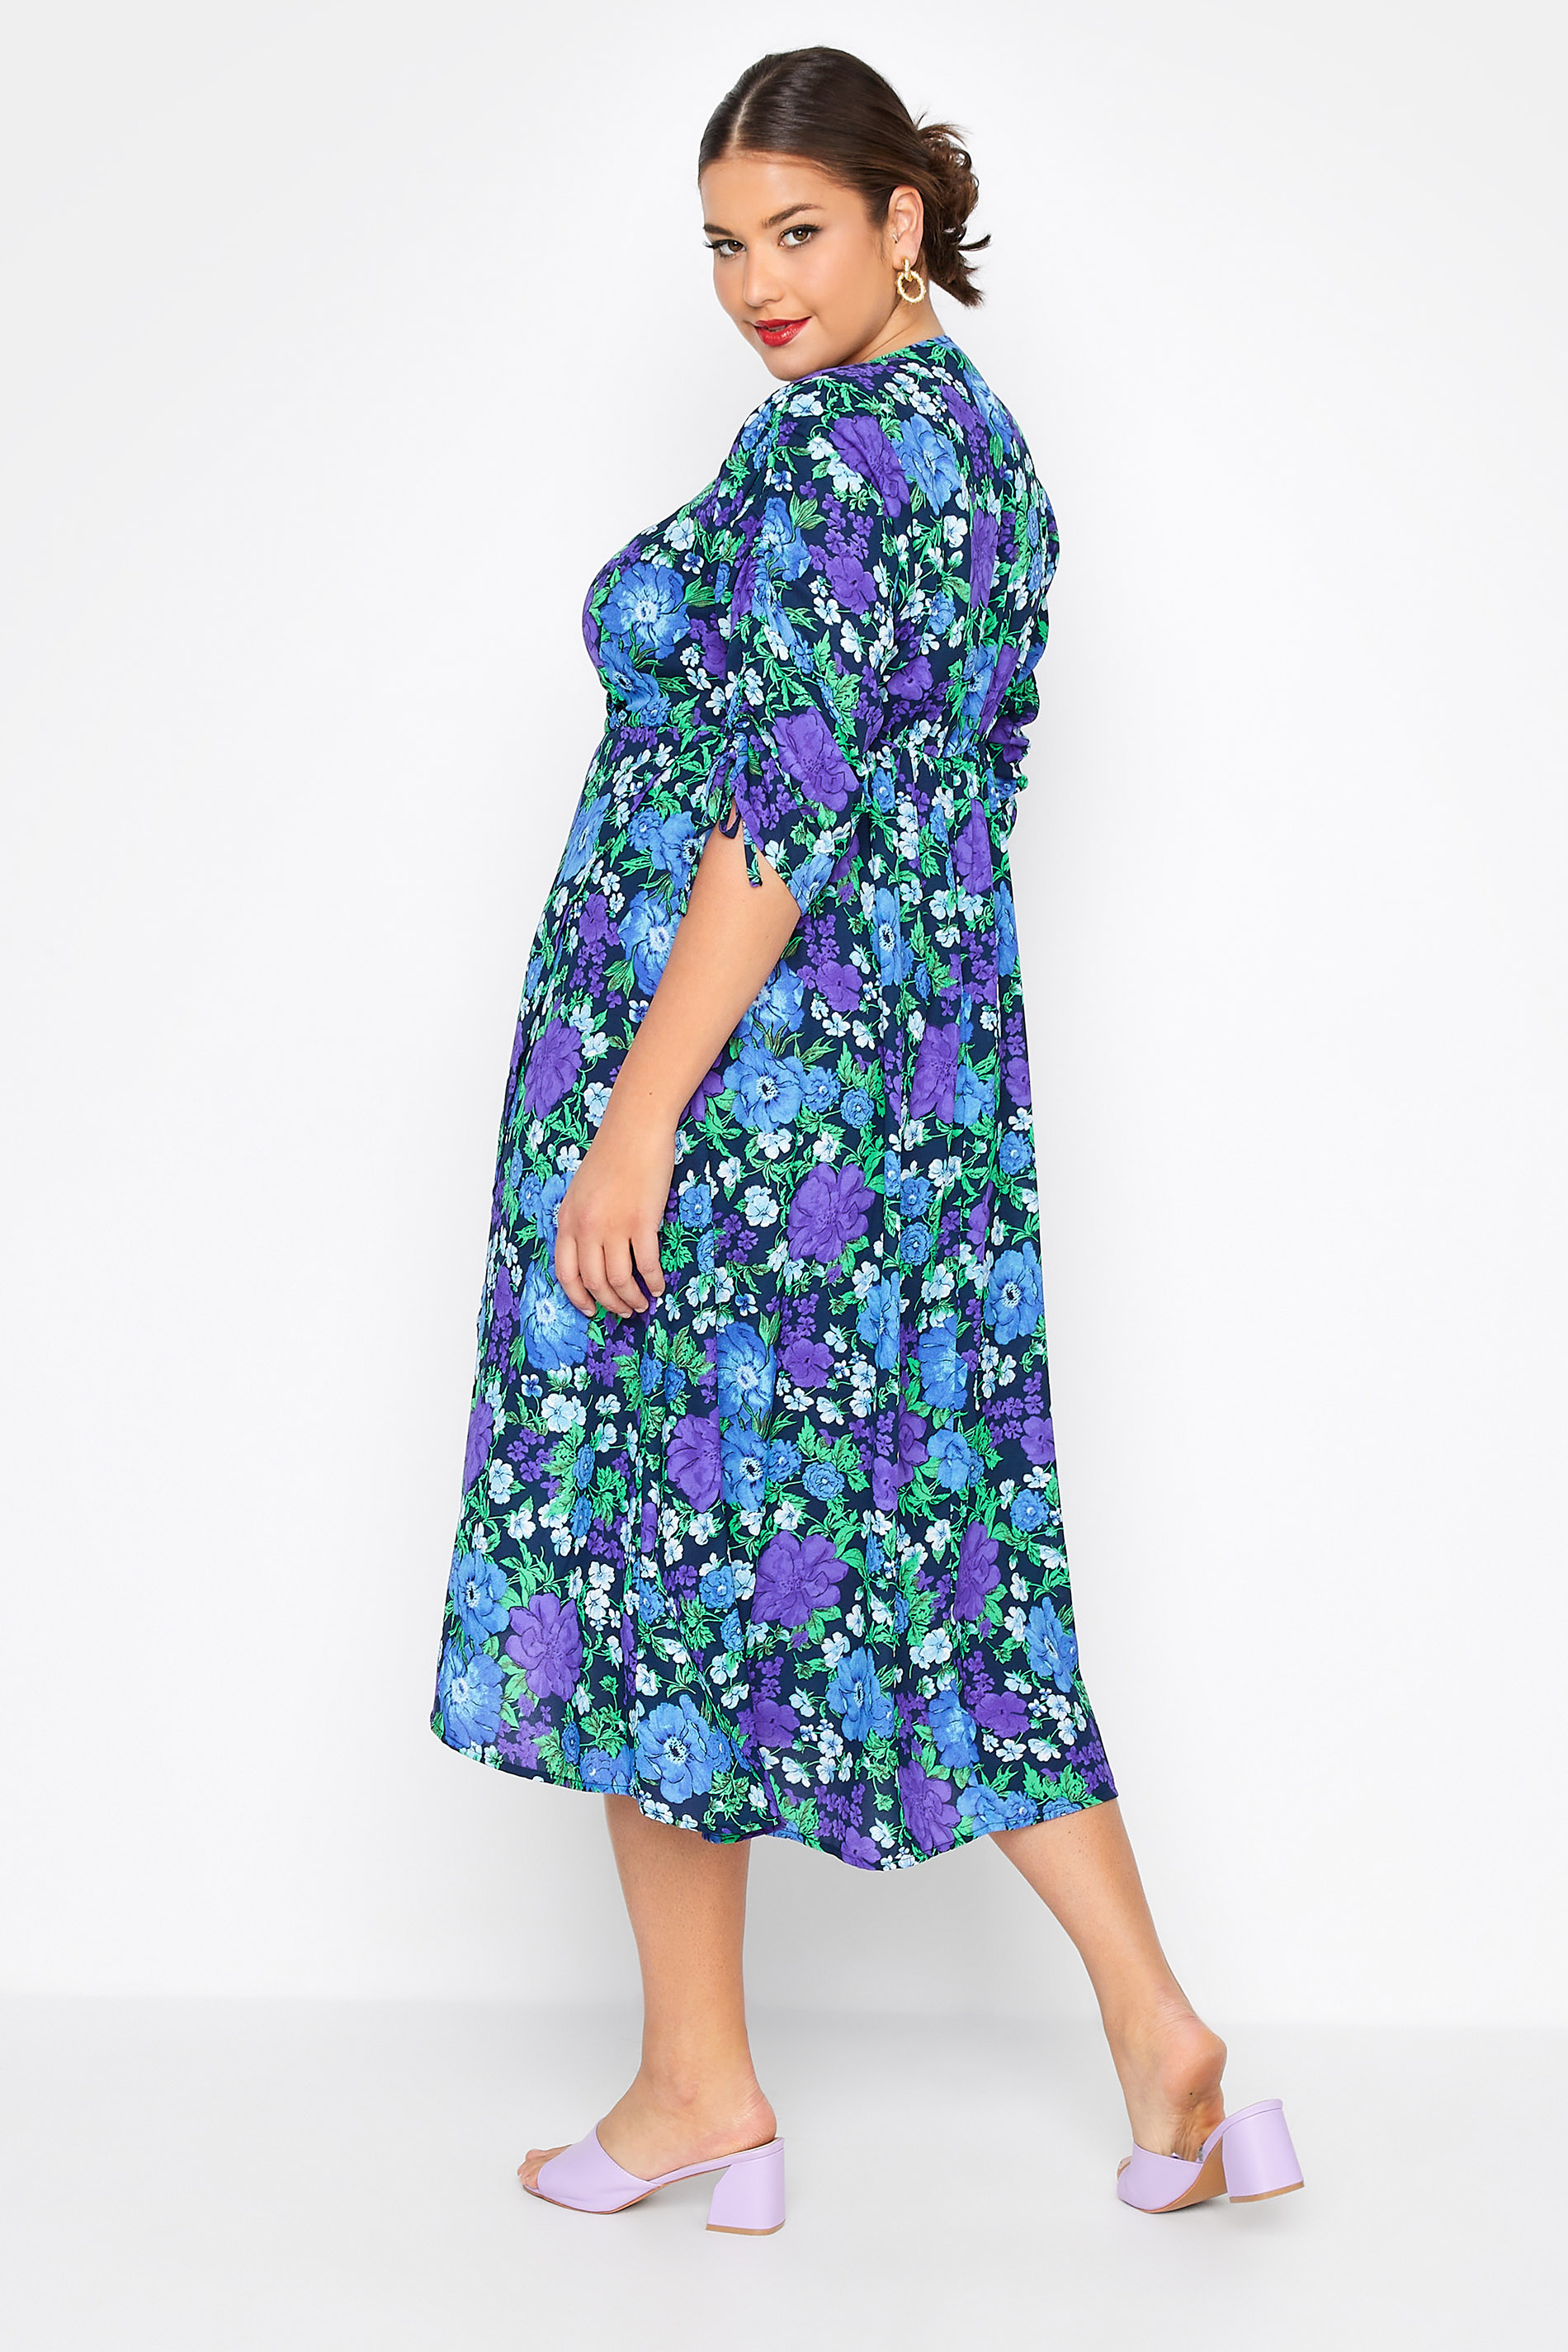 Robes Grande Taille Grande taille  Robes Portefeuilles | LIMITED COLLECTION - Robe Cache-Coeur Floral Bleu & Violet - YC00459